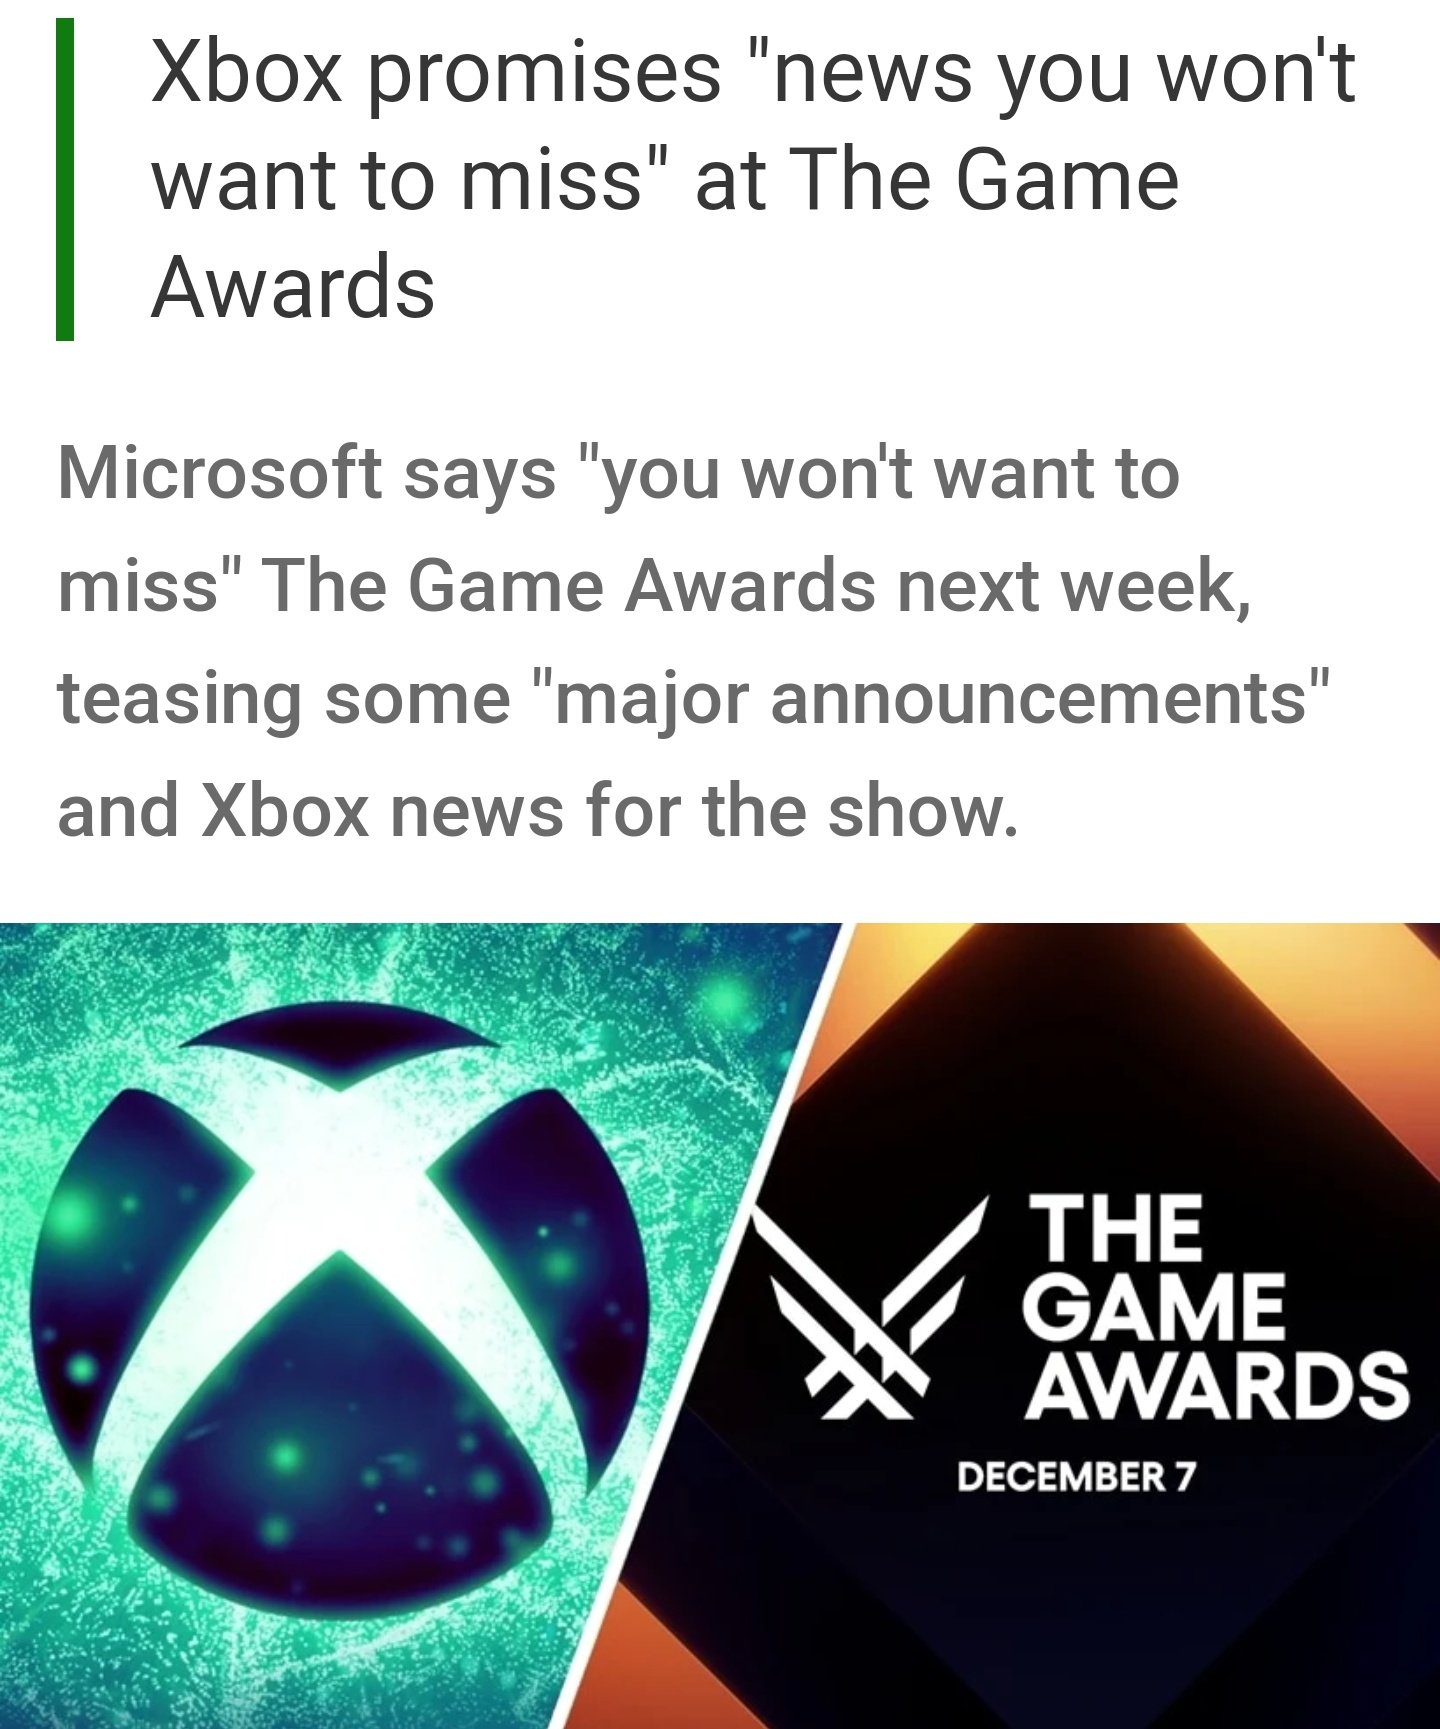 Xbox promises news you won't want to miss at The Game Awards